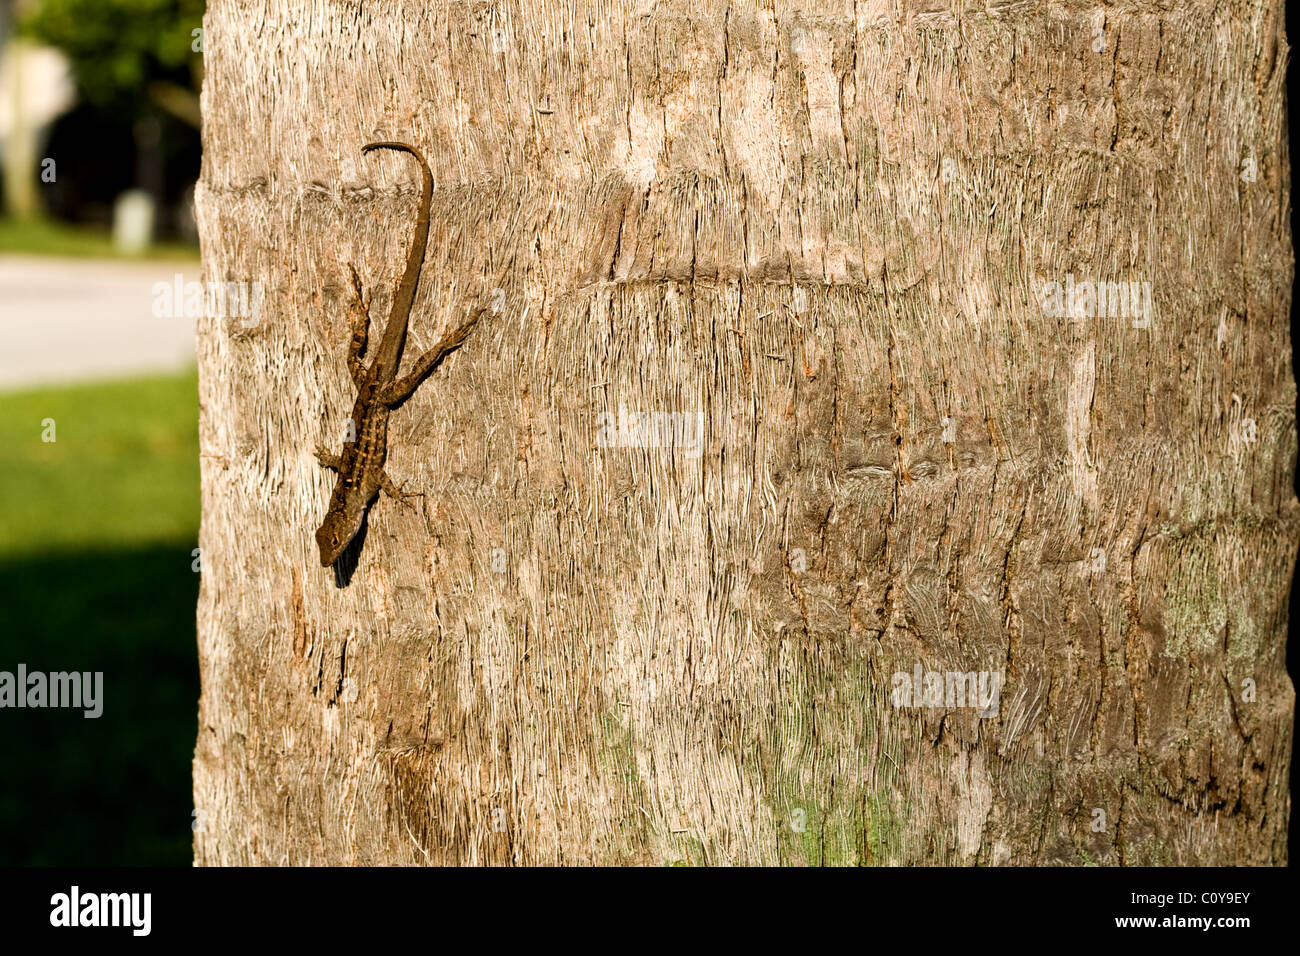 Small lizard on the trunk of a tree Stock Photo